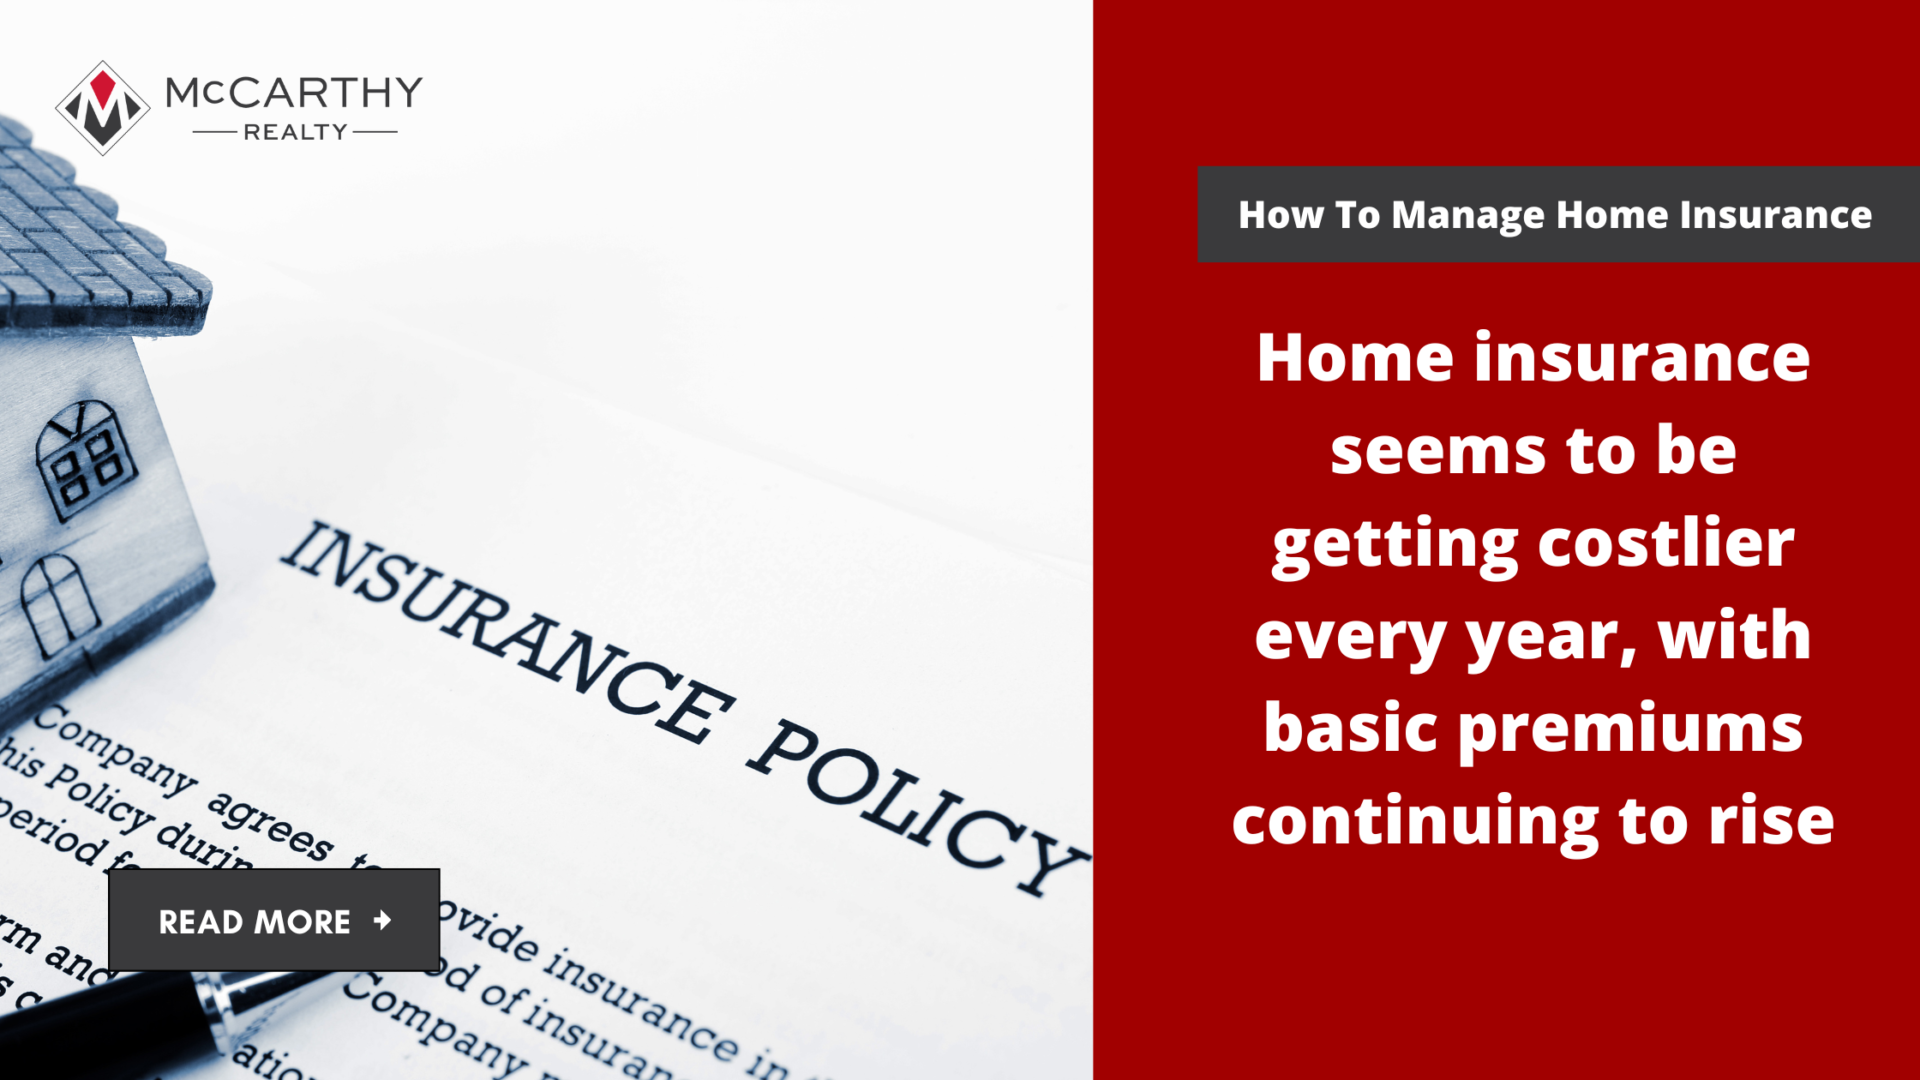 How To Manage Home Insurance